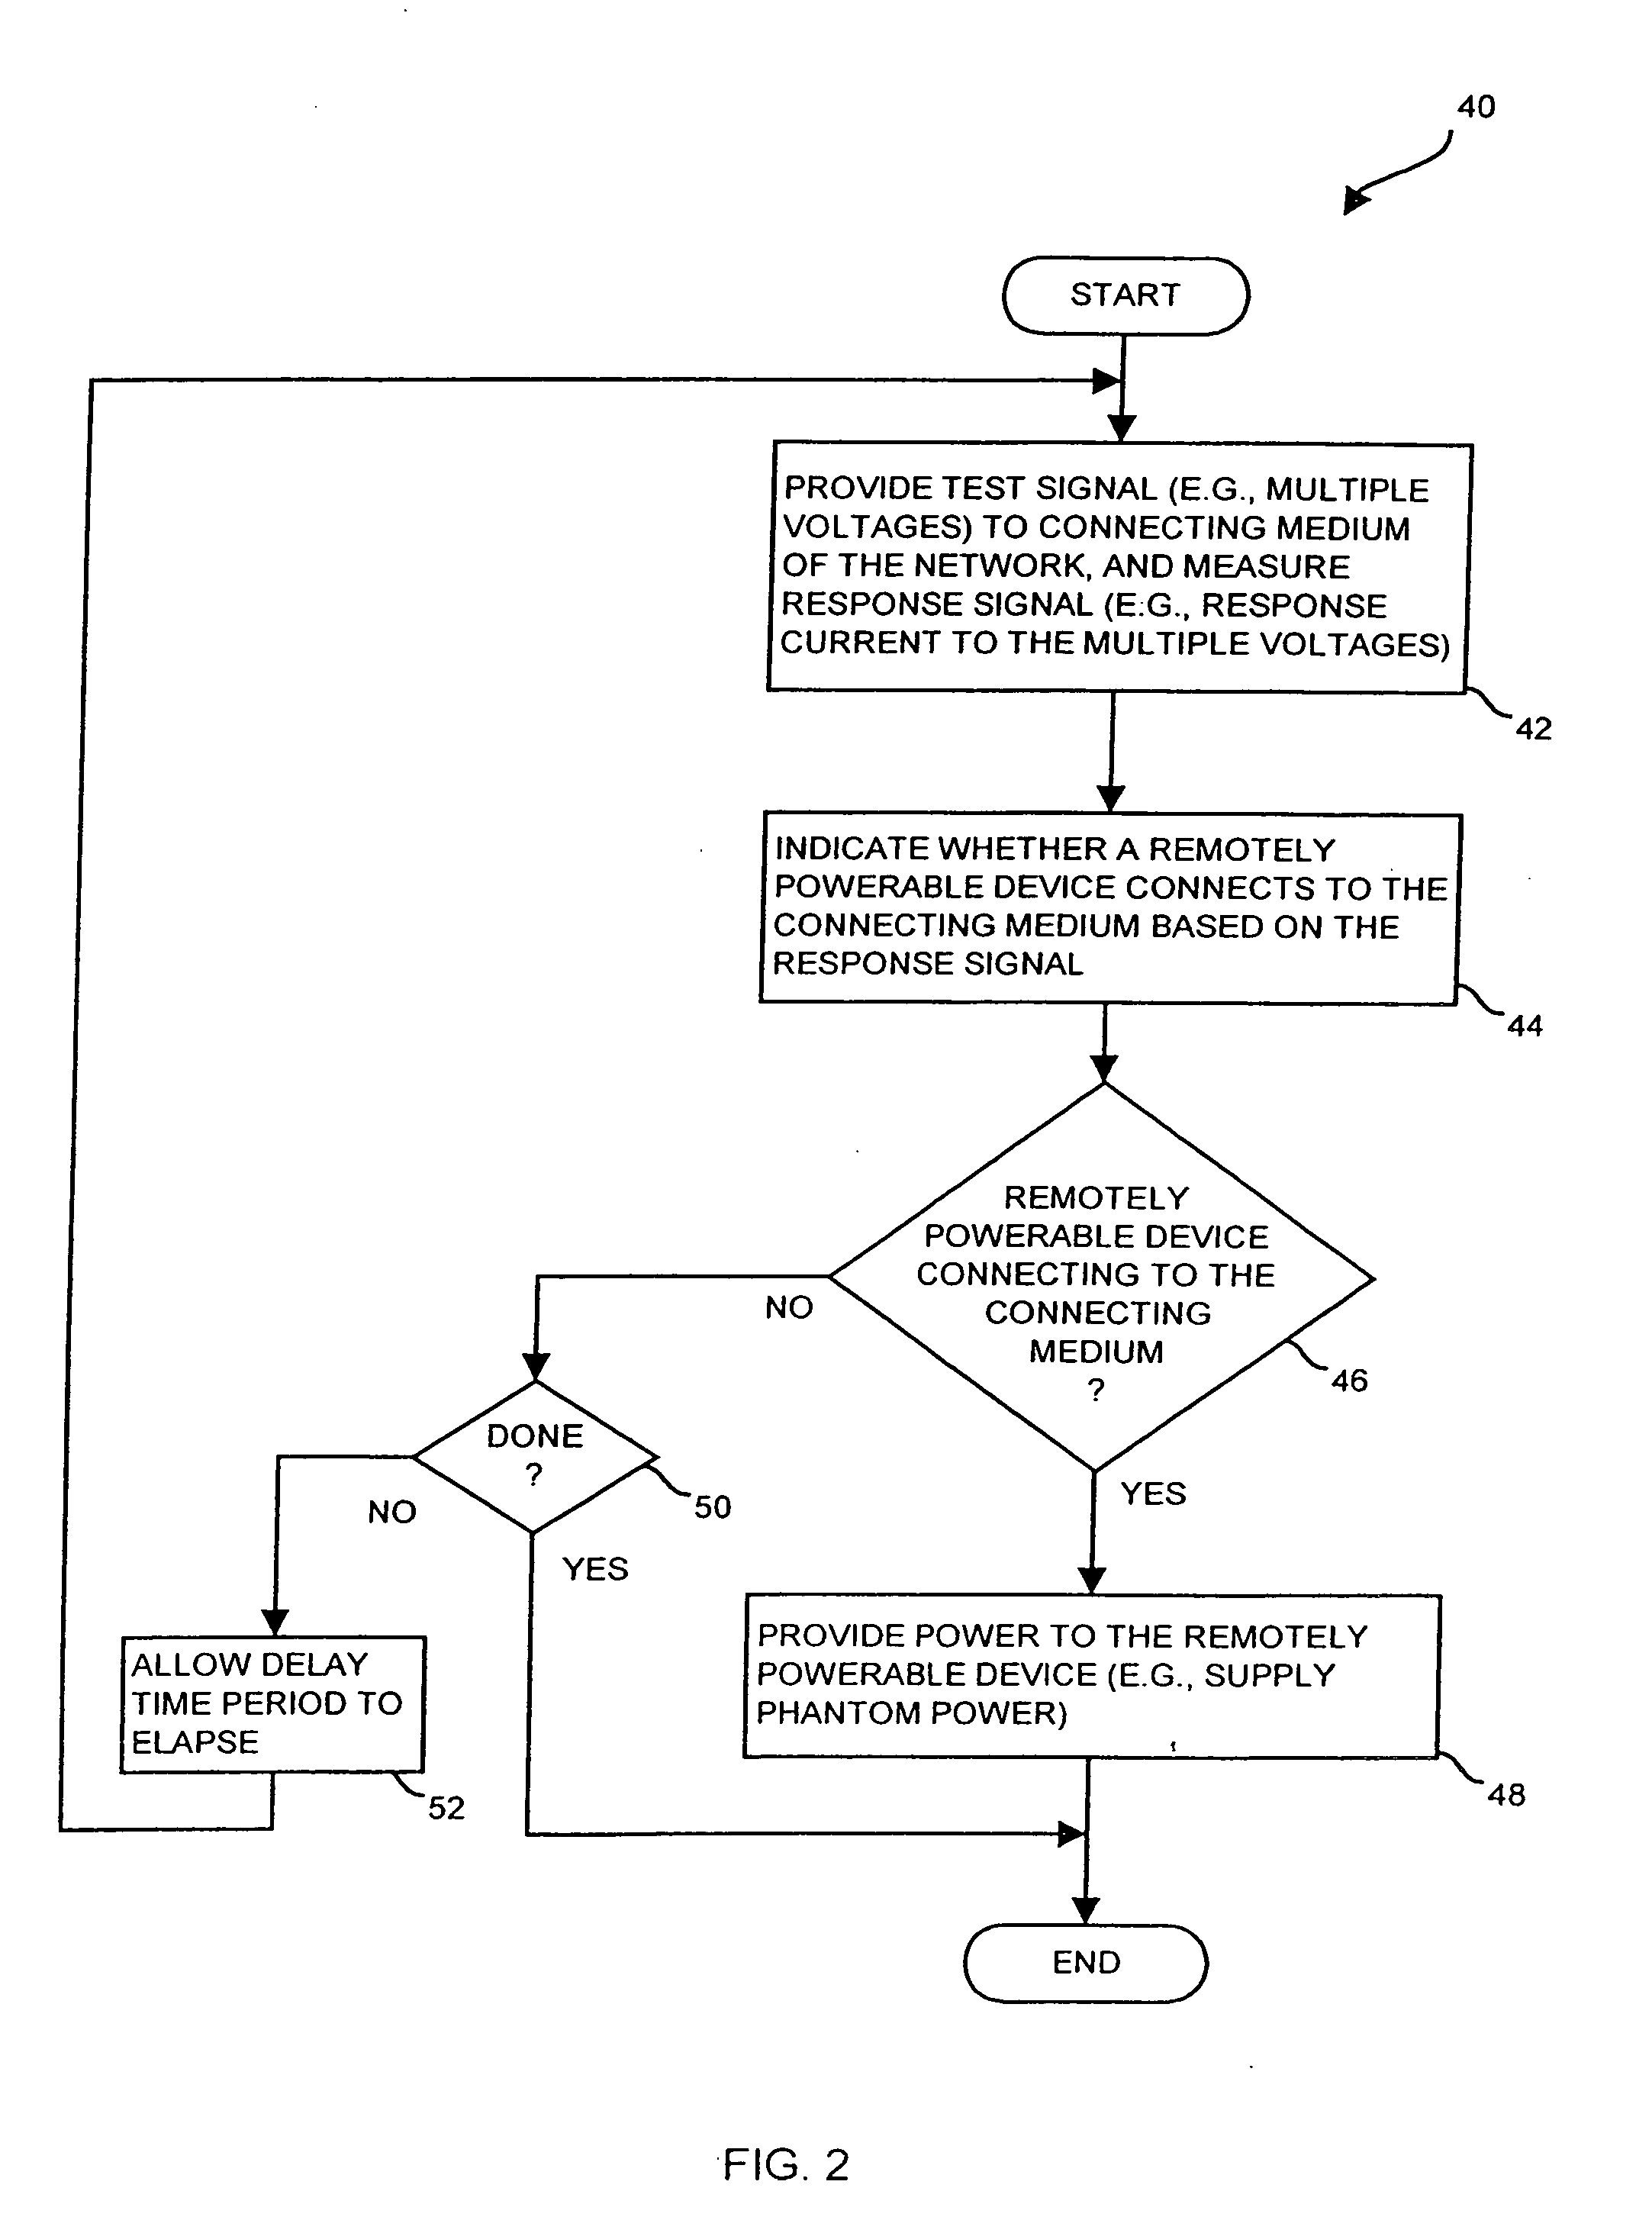 Apparatus for discovering a powerability condition of a computer network